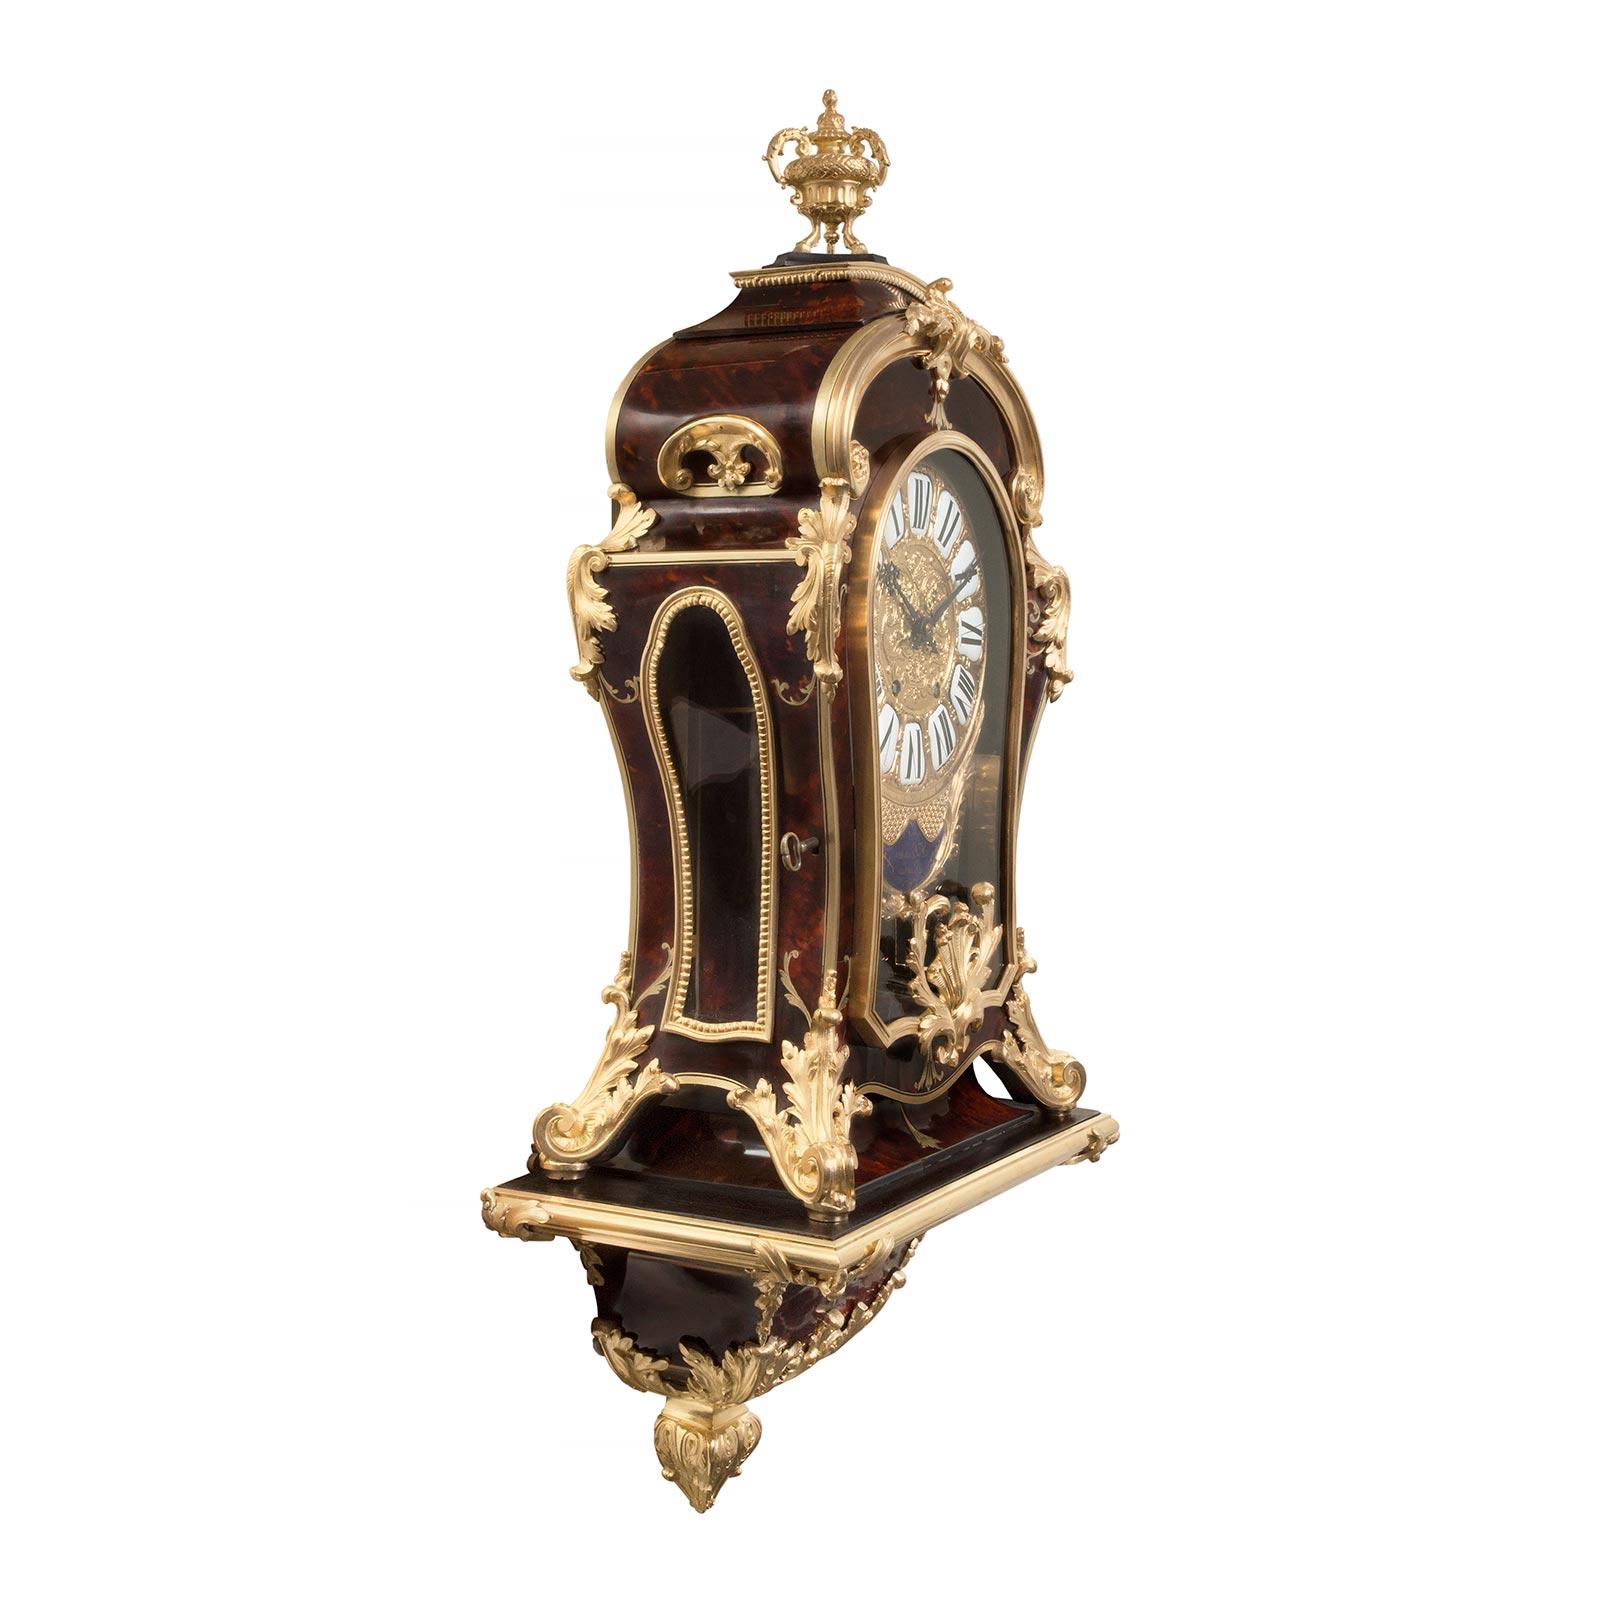 A stunning French 19th century Louis XIV st. tortoiseshell, brass and ormolu Cartel Clock signed F.Lesage Paris. The beautiful clock is raised on its original support shelf centered by a richly chased ormolu foliate final below a brass inlaid